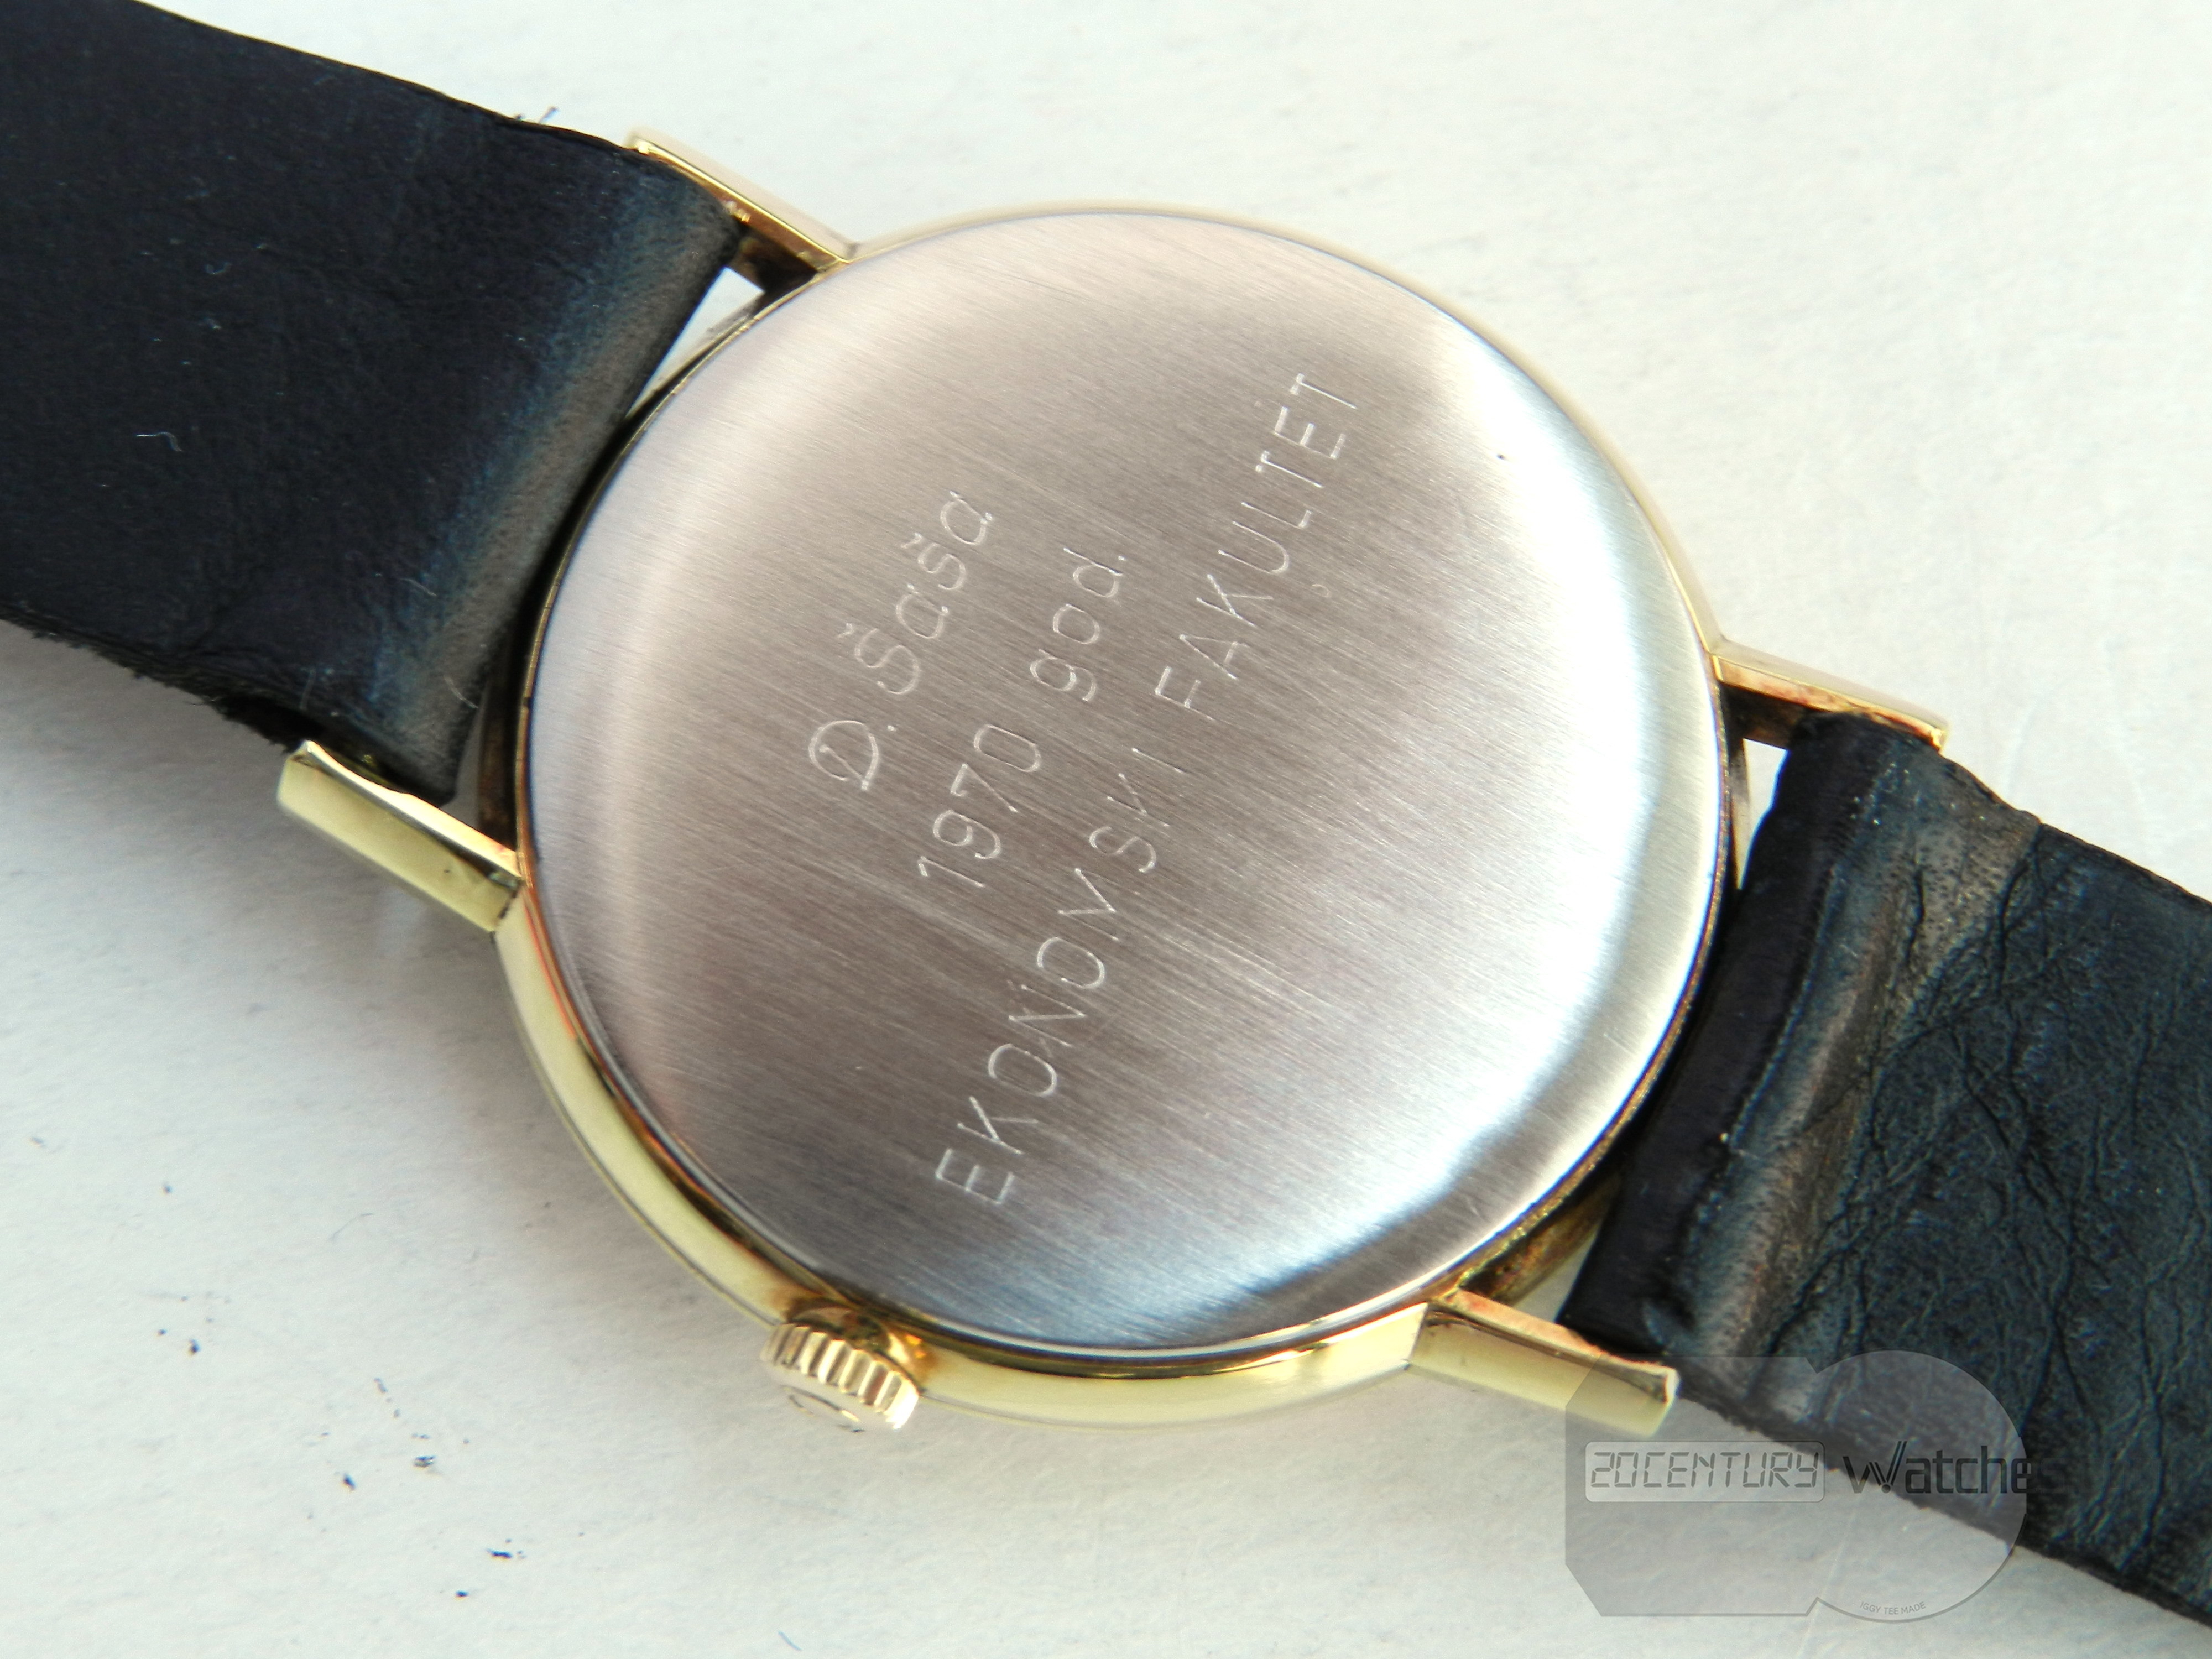 Omega Geneve cal.601 – 20th Century Watches